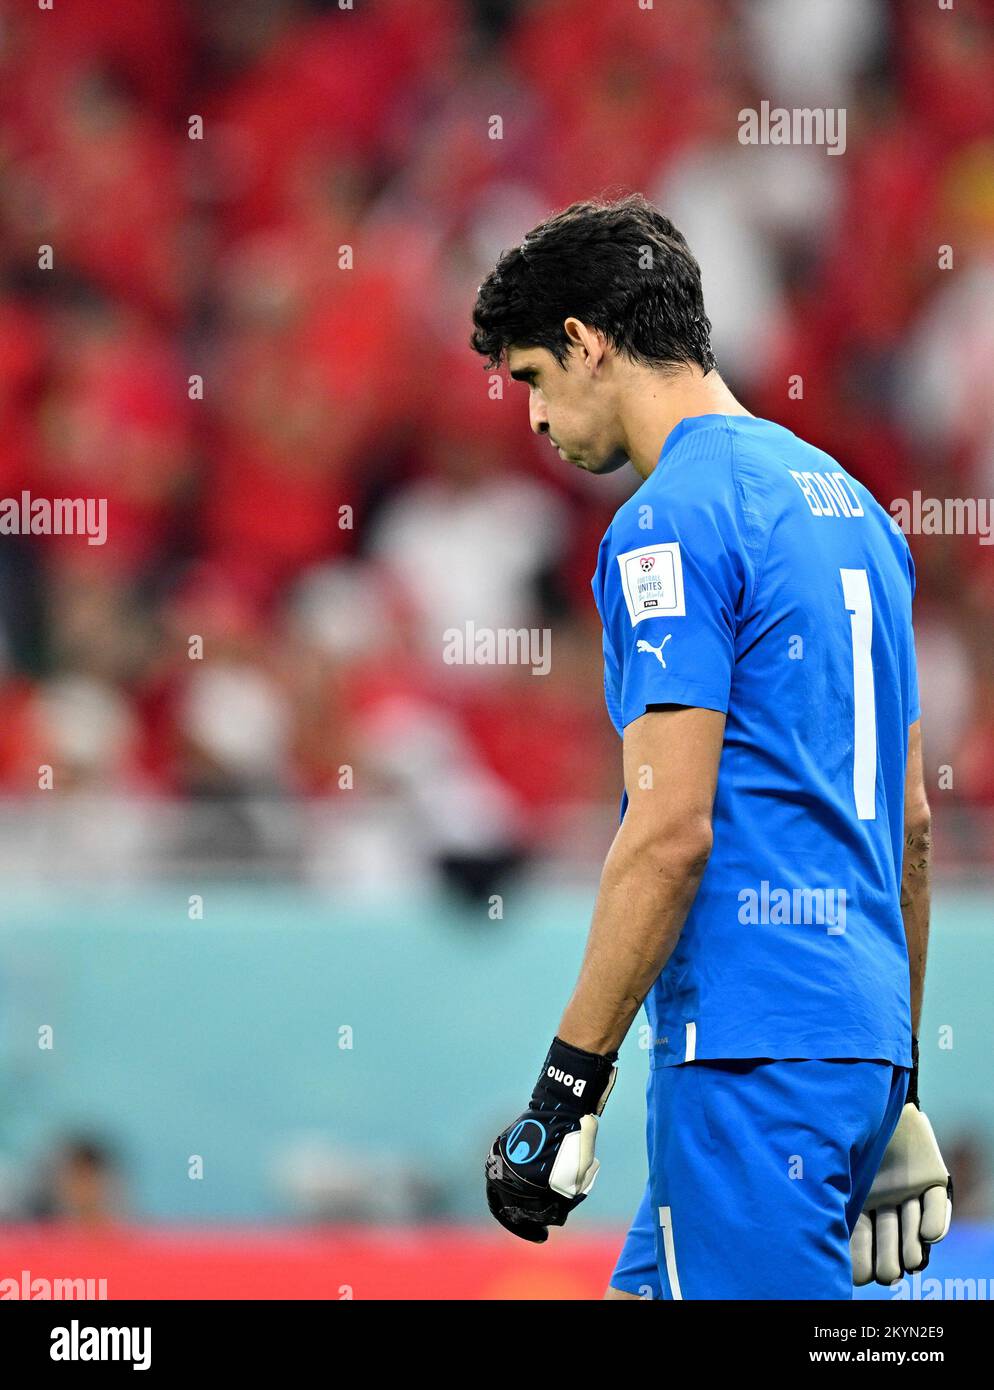 Doha, Qatar. 1st Dec, 2022. Yassine Bounou, goalkeeper of Morocco, reacts during the Group F match between Canada and Morocco at the 2022 FIFA World Cup at Al Thumama Stadium in Doha, Qatar, Dec. 1, 2022. Credit: Xin Yuewei/Xinhua/Alamy Live News Stock Photo